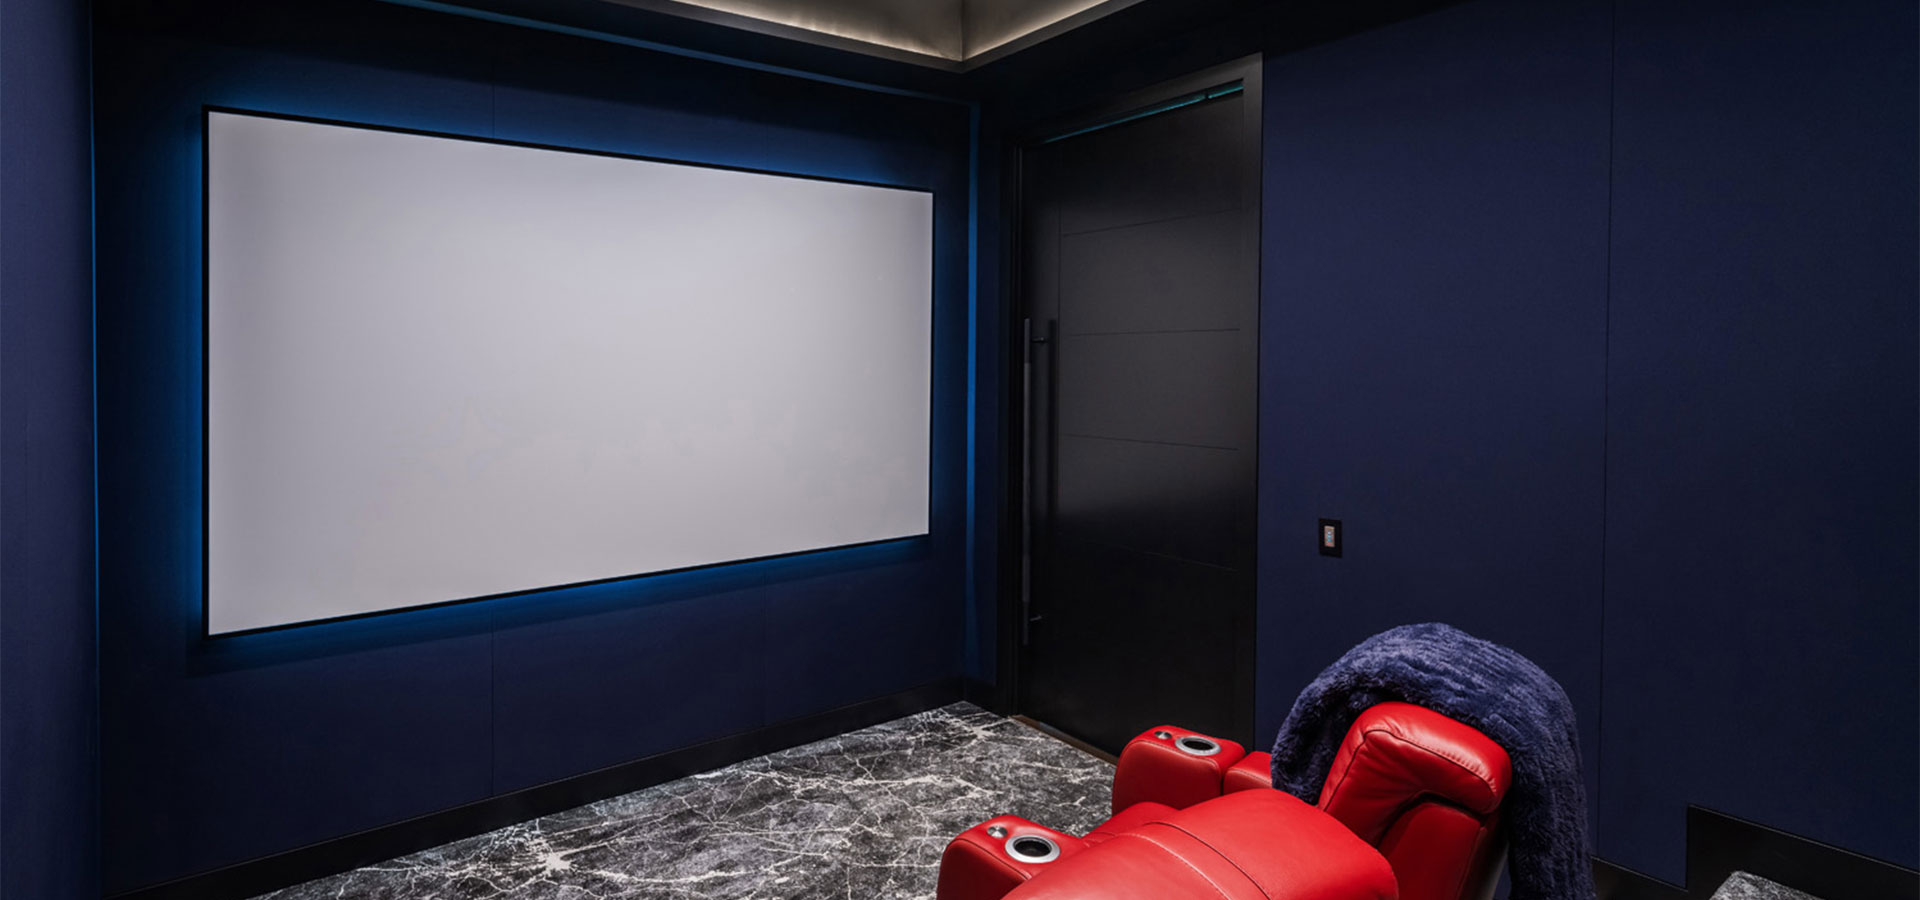 The media room features LED lighting, acoustical materials and concealed speakers